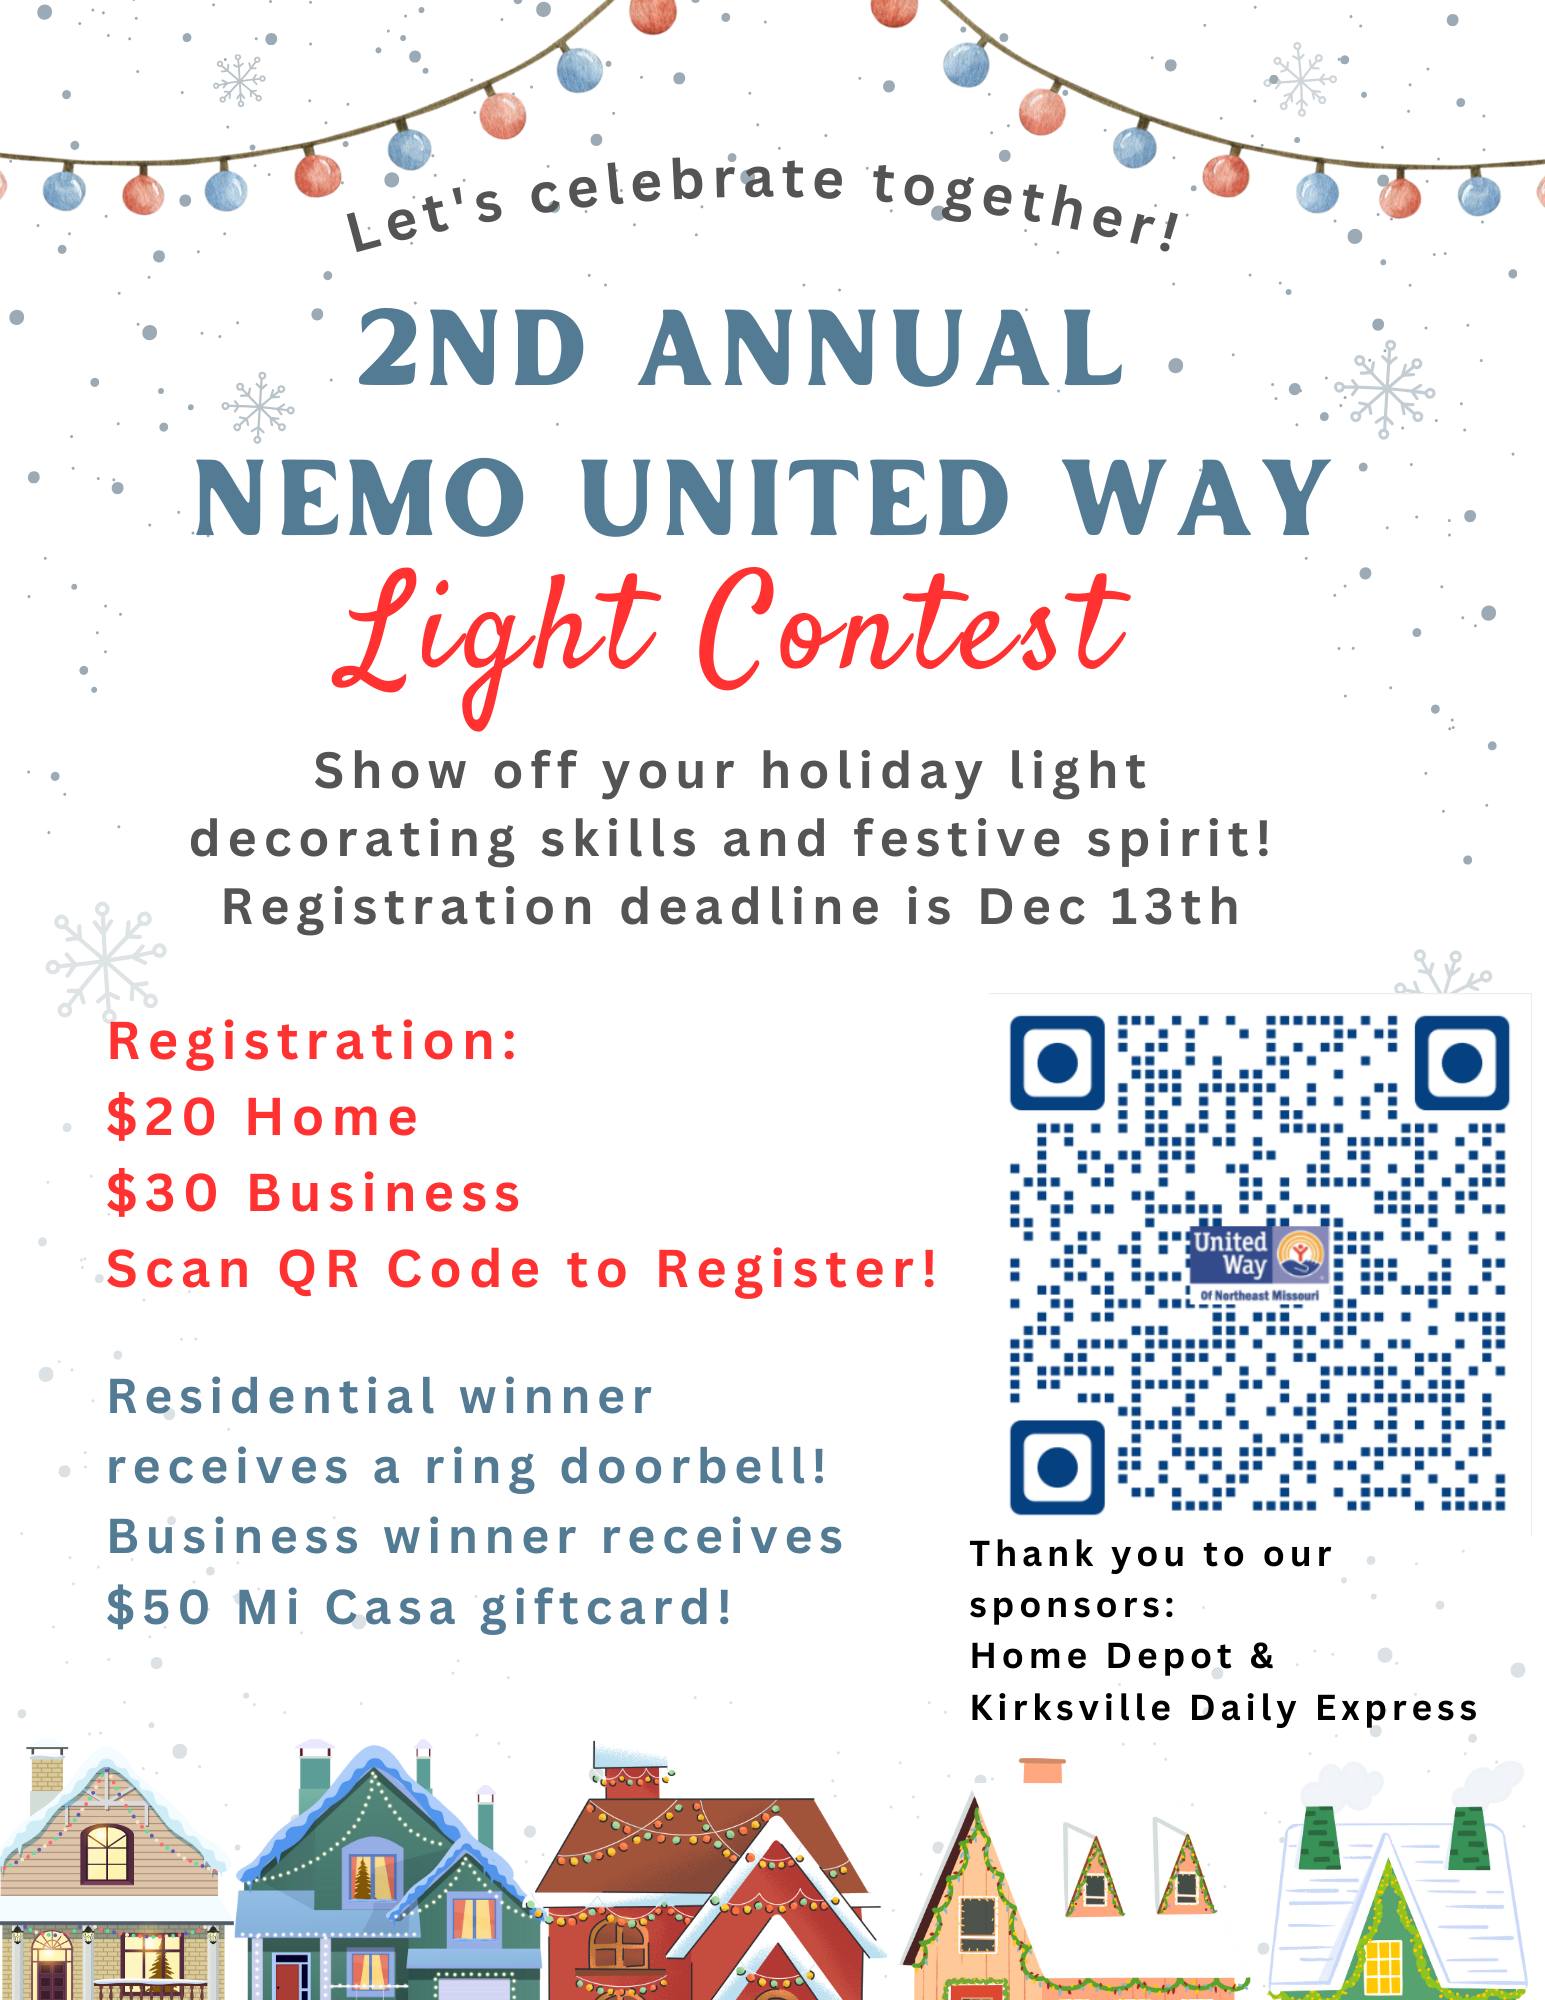 Check more about 2nd Annual NEMO United Way Holiday Light Contest